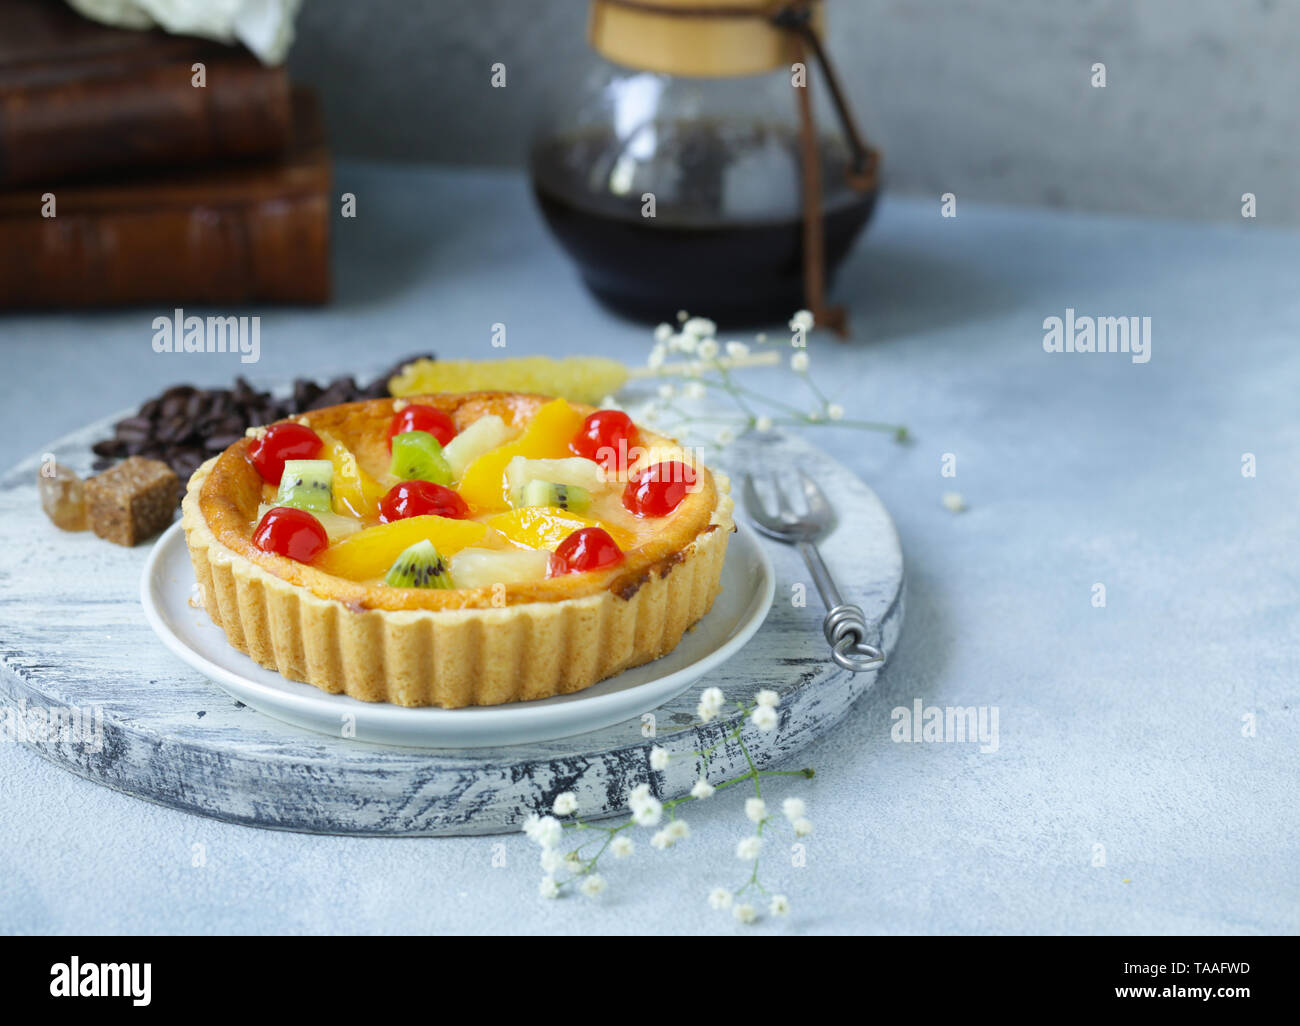 Dessert Mini Tart With Cottage Cheese Berries And Fruits Stock